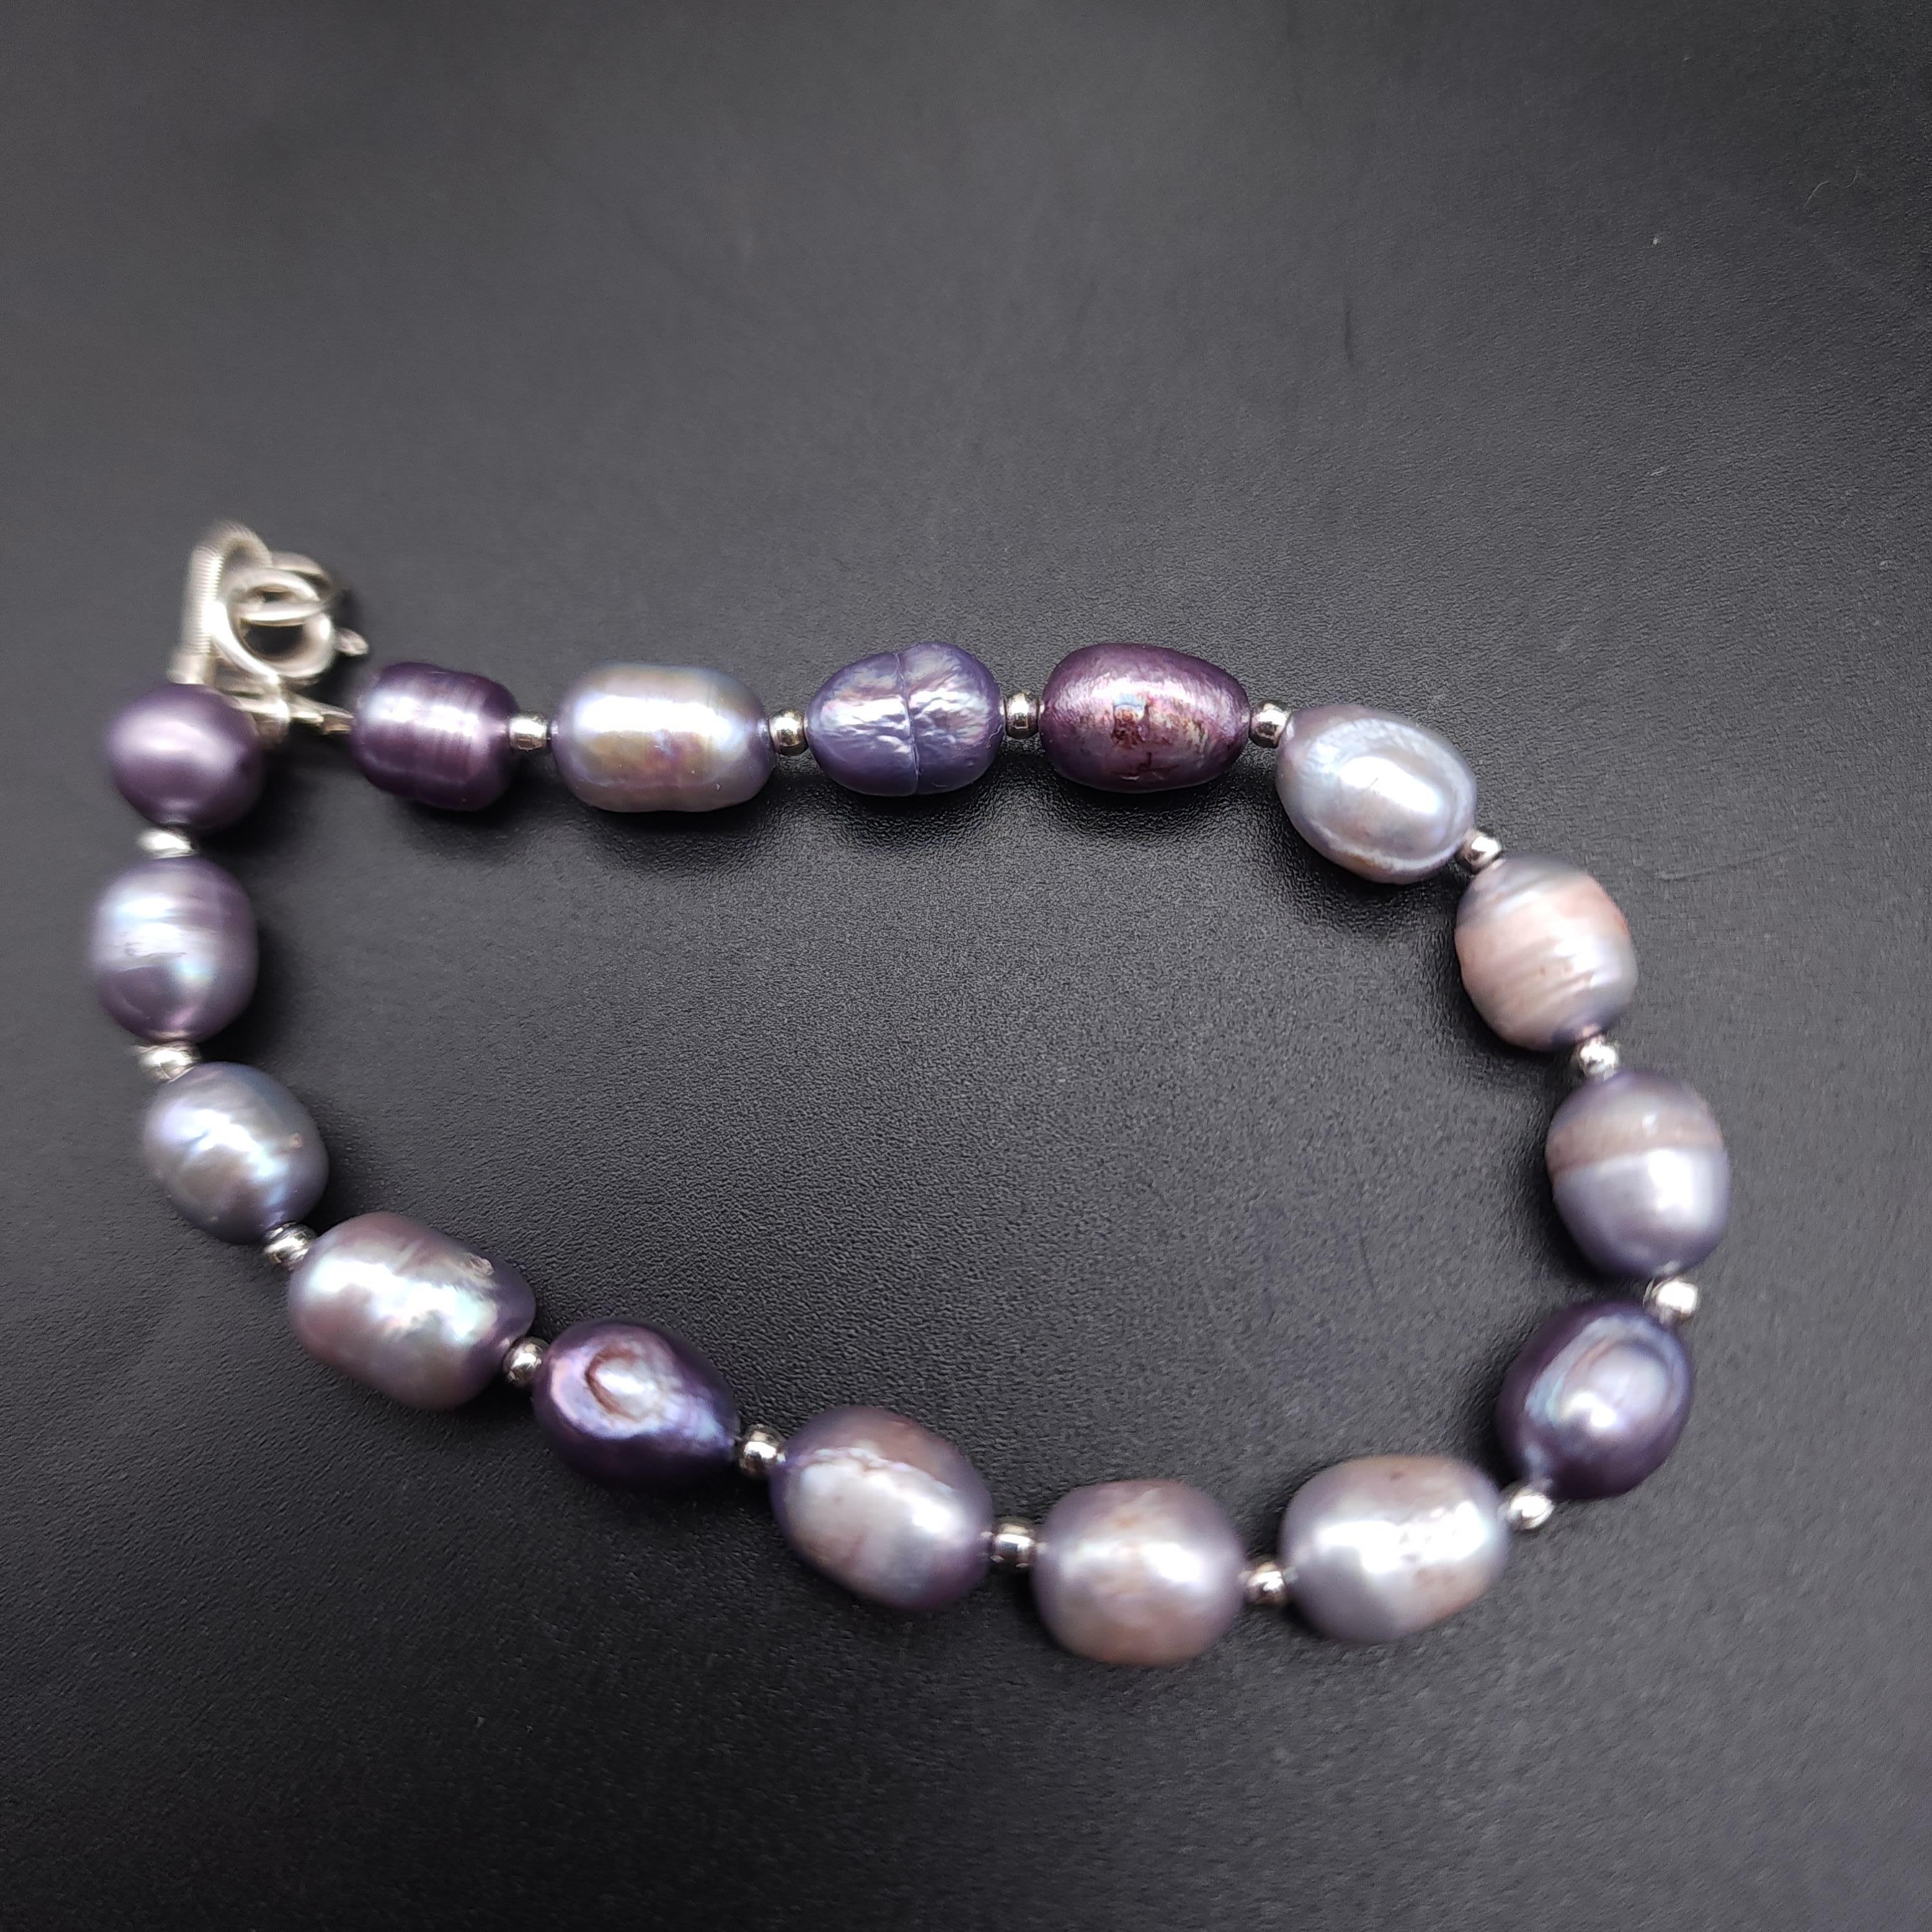 Retro Vintage Lavender Pearl Bead Bracelet with Sterling Silver Accents, Clasp For Sale